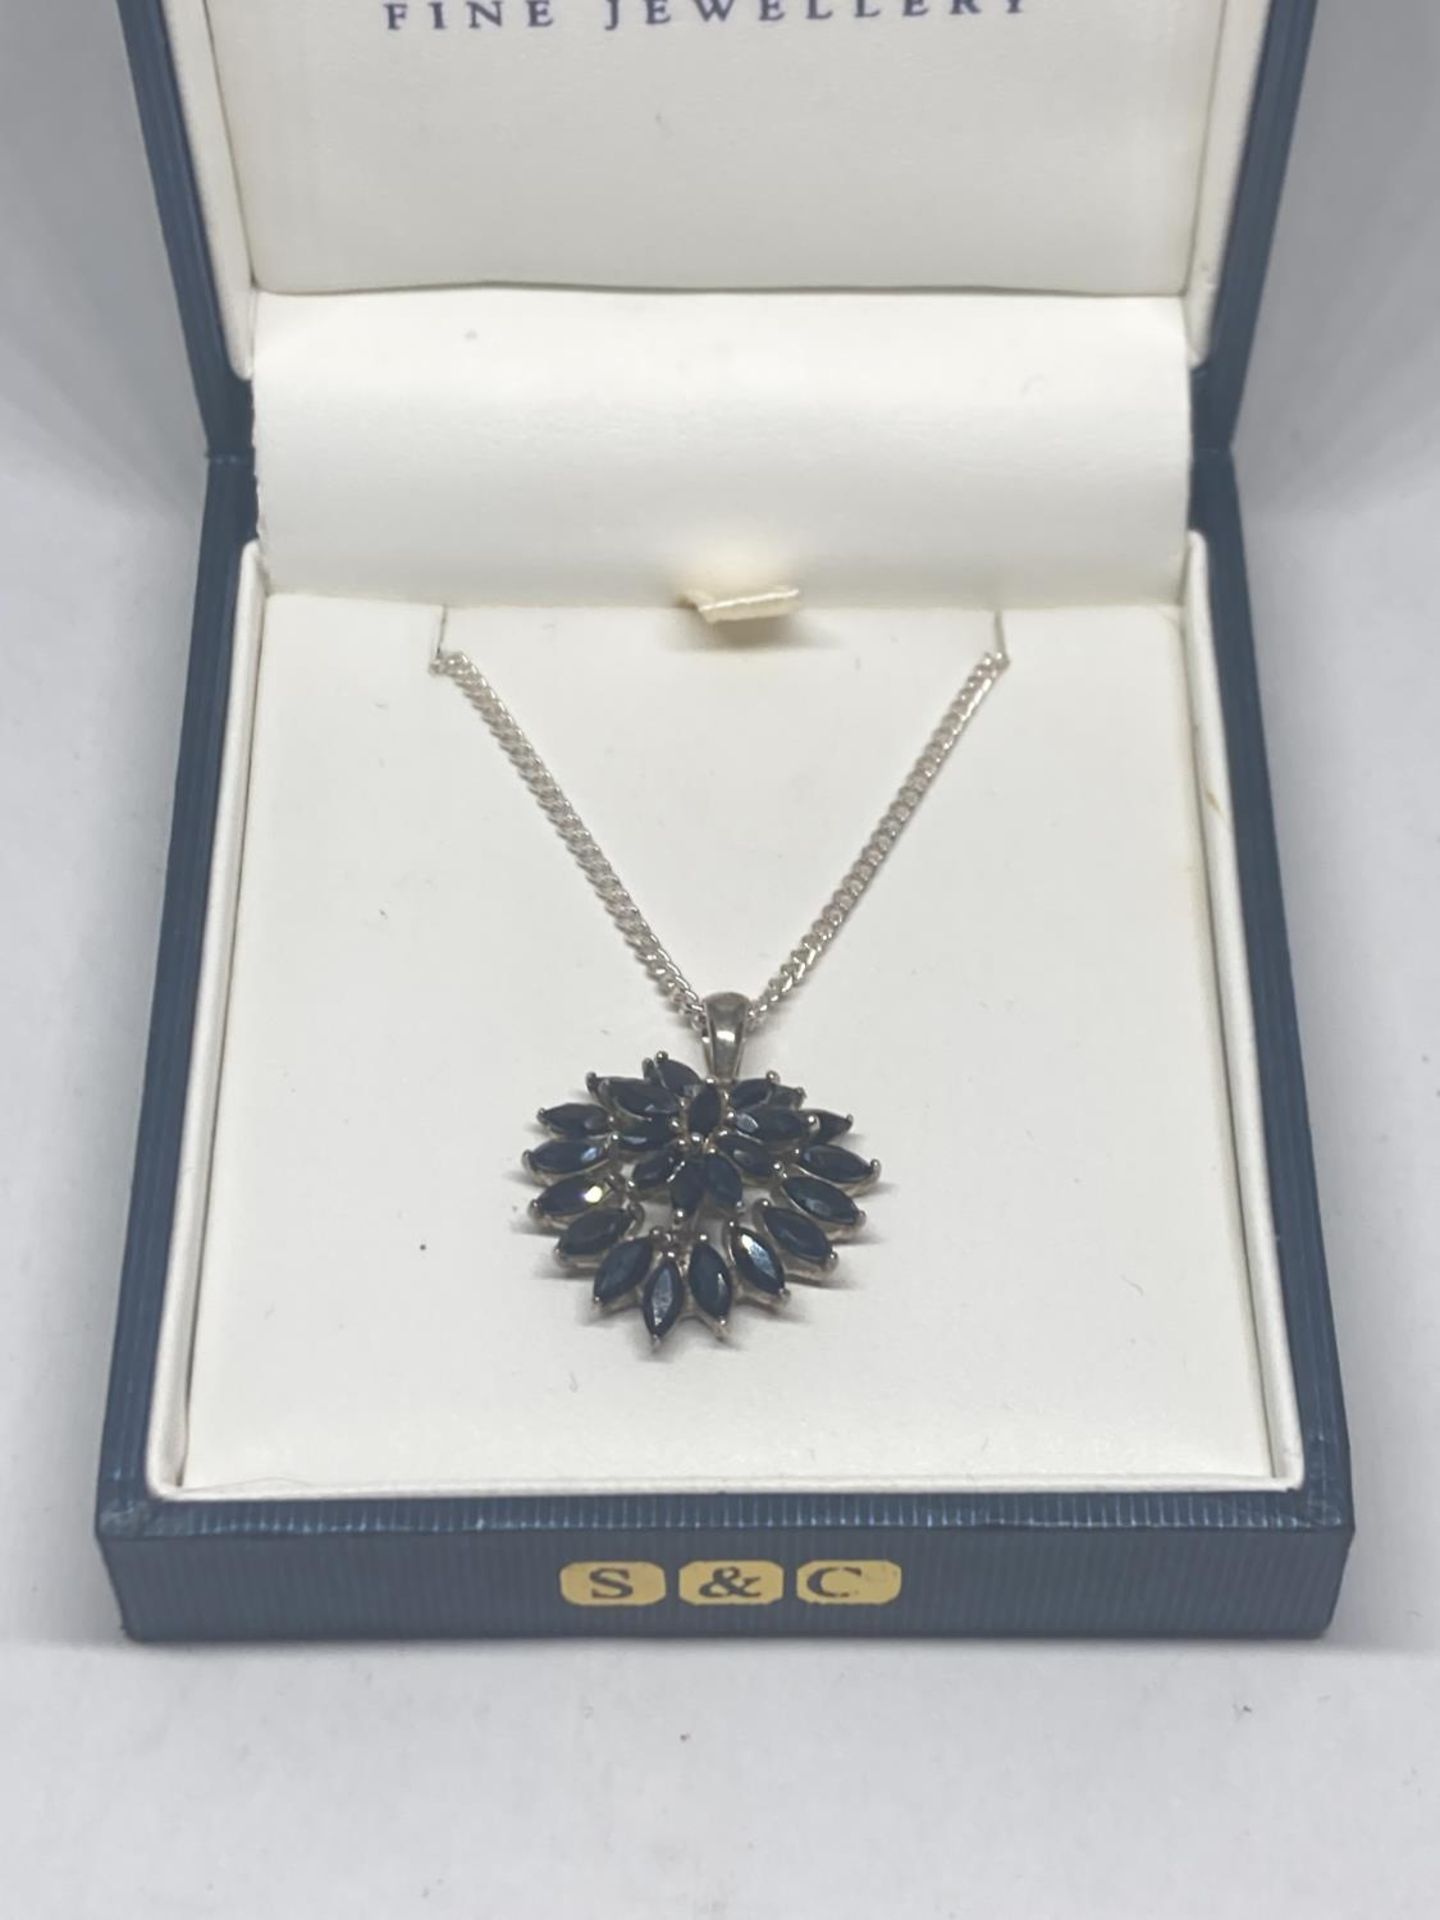 A MARKED SILVER NECKLACE WITH A BLACKSTONE PENDANT IN A PRESENTATION BOX